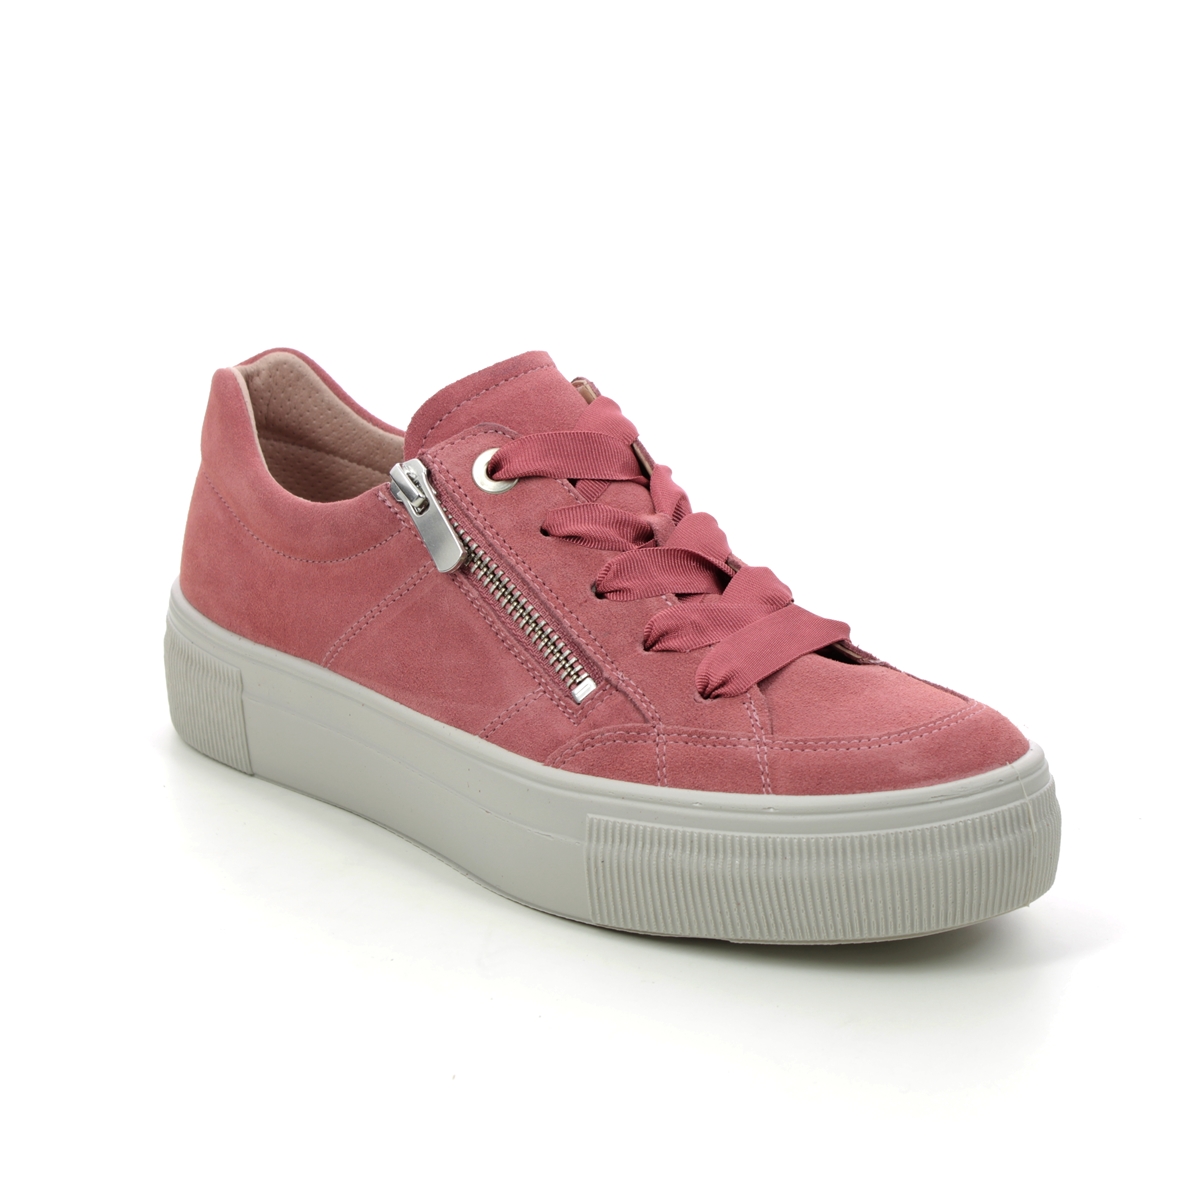 Legero Lima Zip Rose Pink Womens Trainers 2000911-5620 In Size 37 In Plain Rose Pink